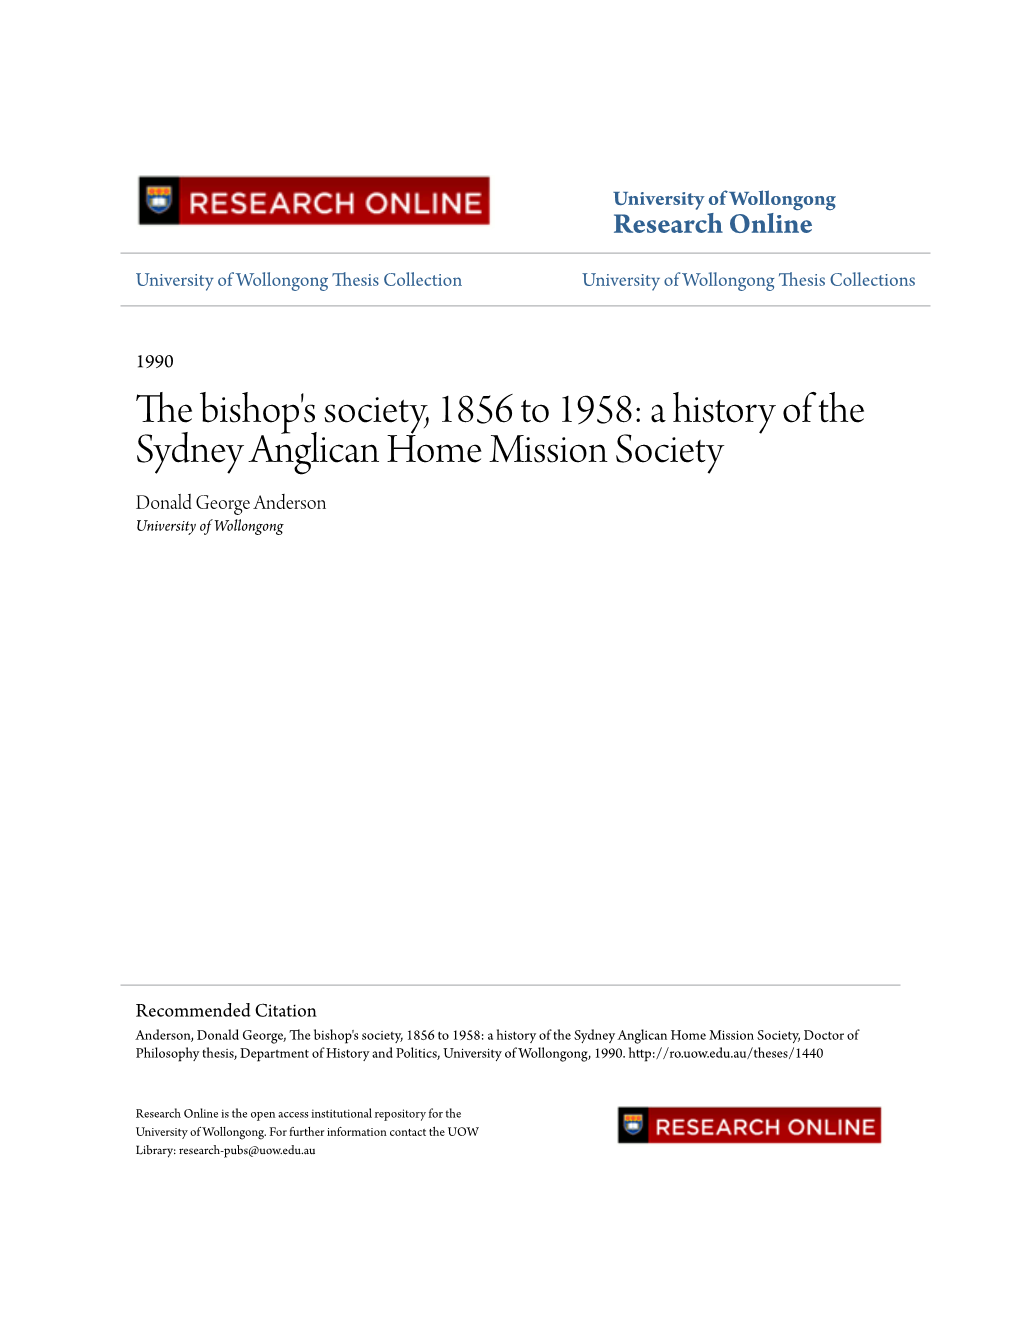 The Bishop's Society, 1856 to 1958: a History of the Sydney Anglican Home Mission Society Donald George Anderson University of Wollongong